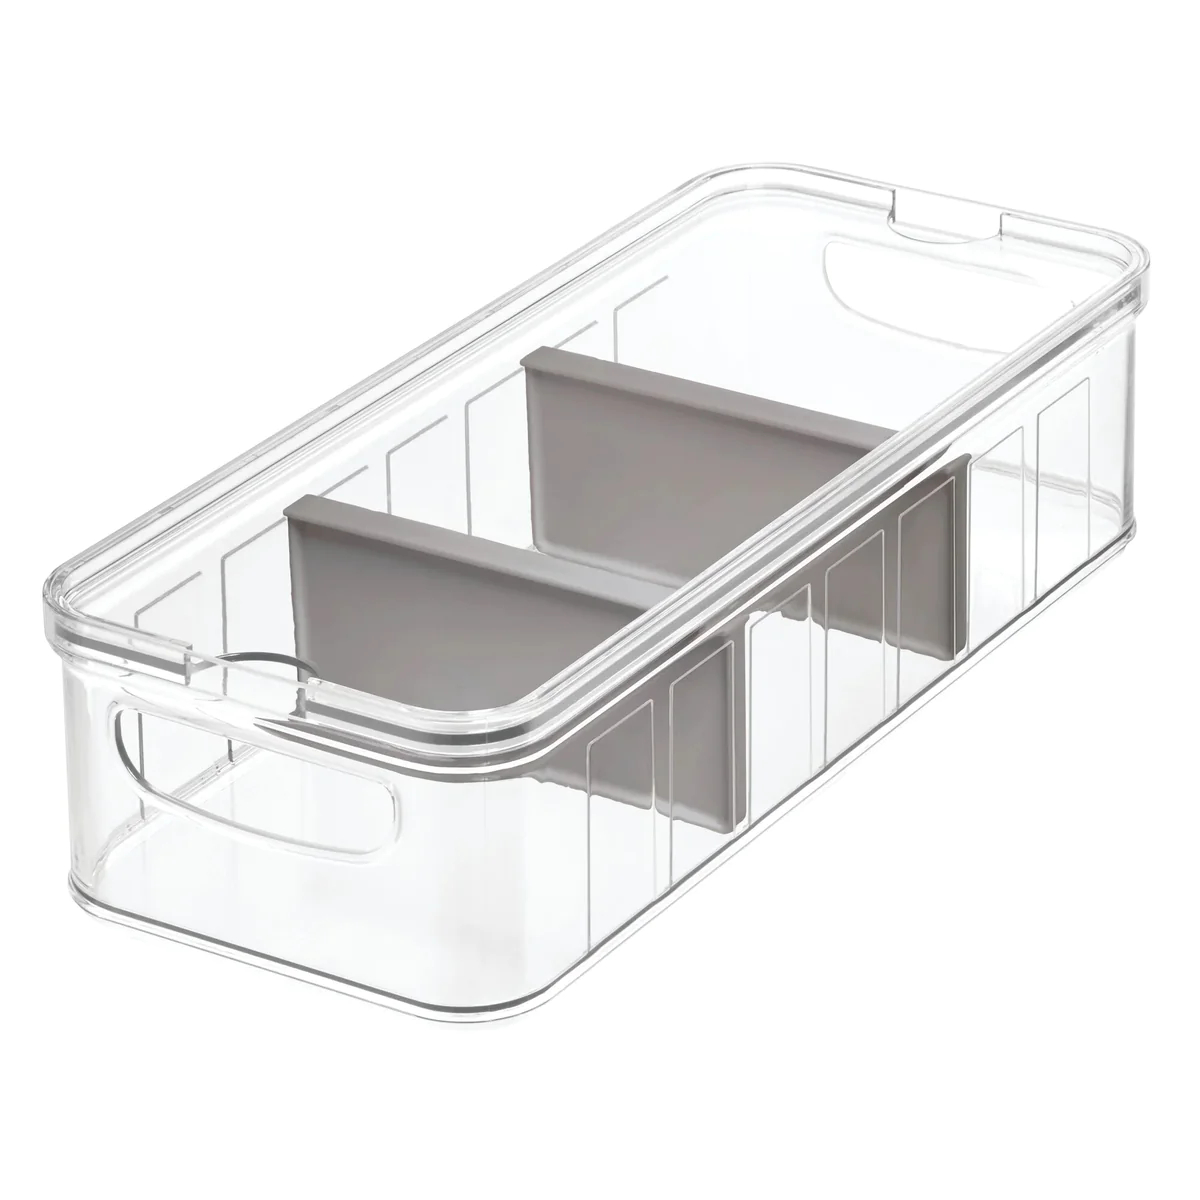 InterDesign 121546 LG Produce Container - Pack of 6